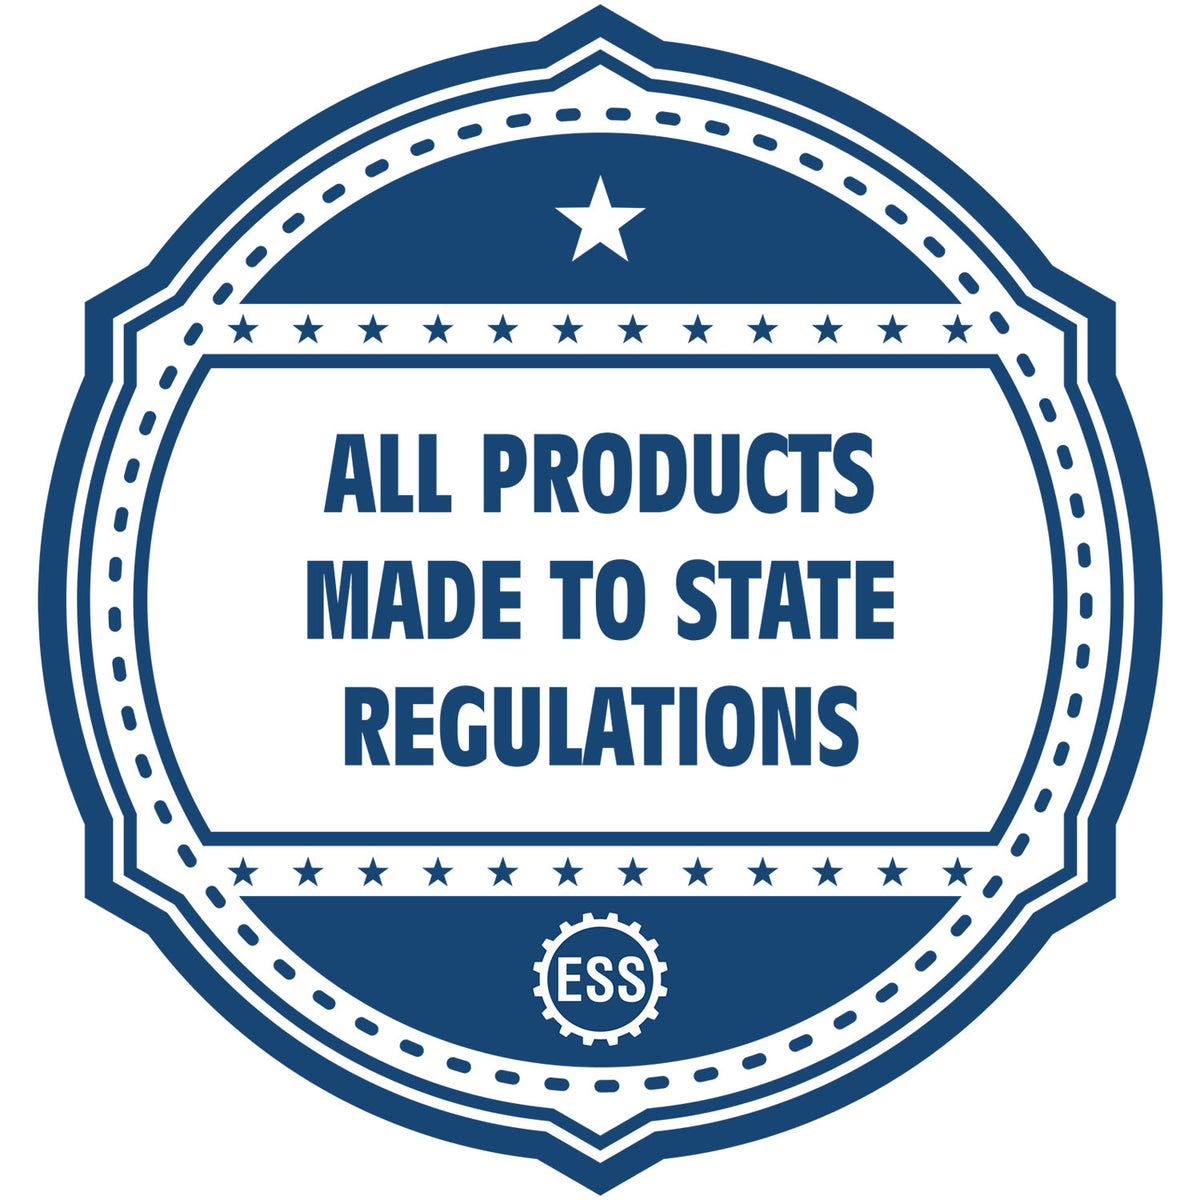 An icon or badge element for the Long Reach Iowa Land Surveyor Seal showing that this product is made in compliance with state regulations.